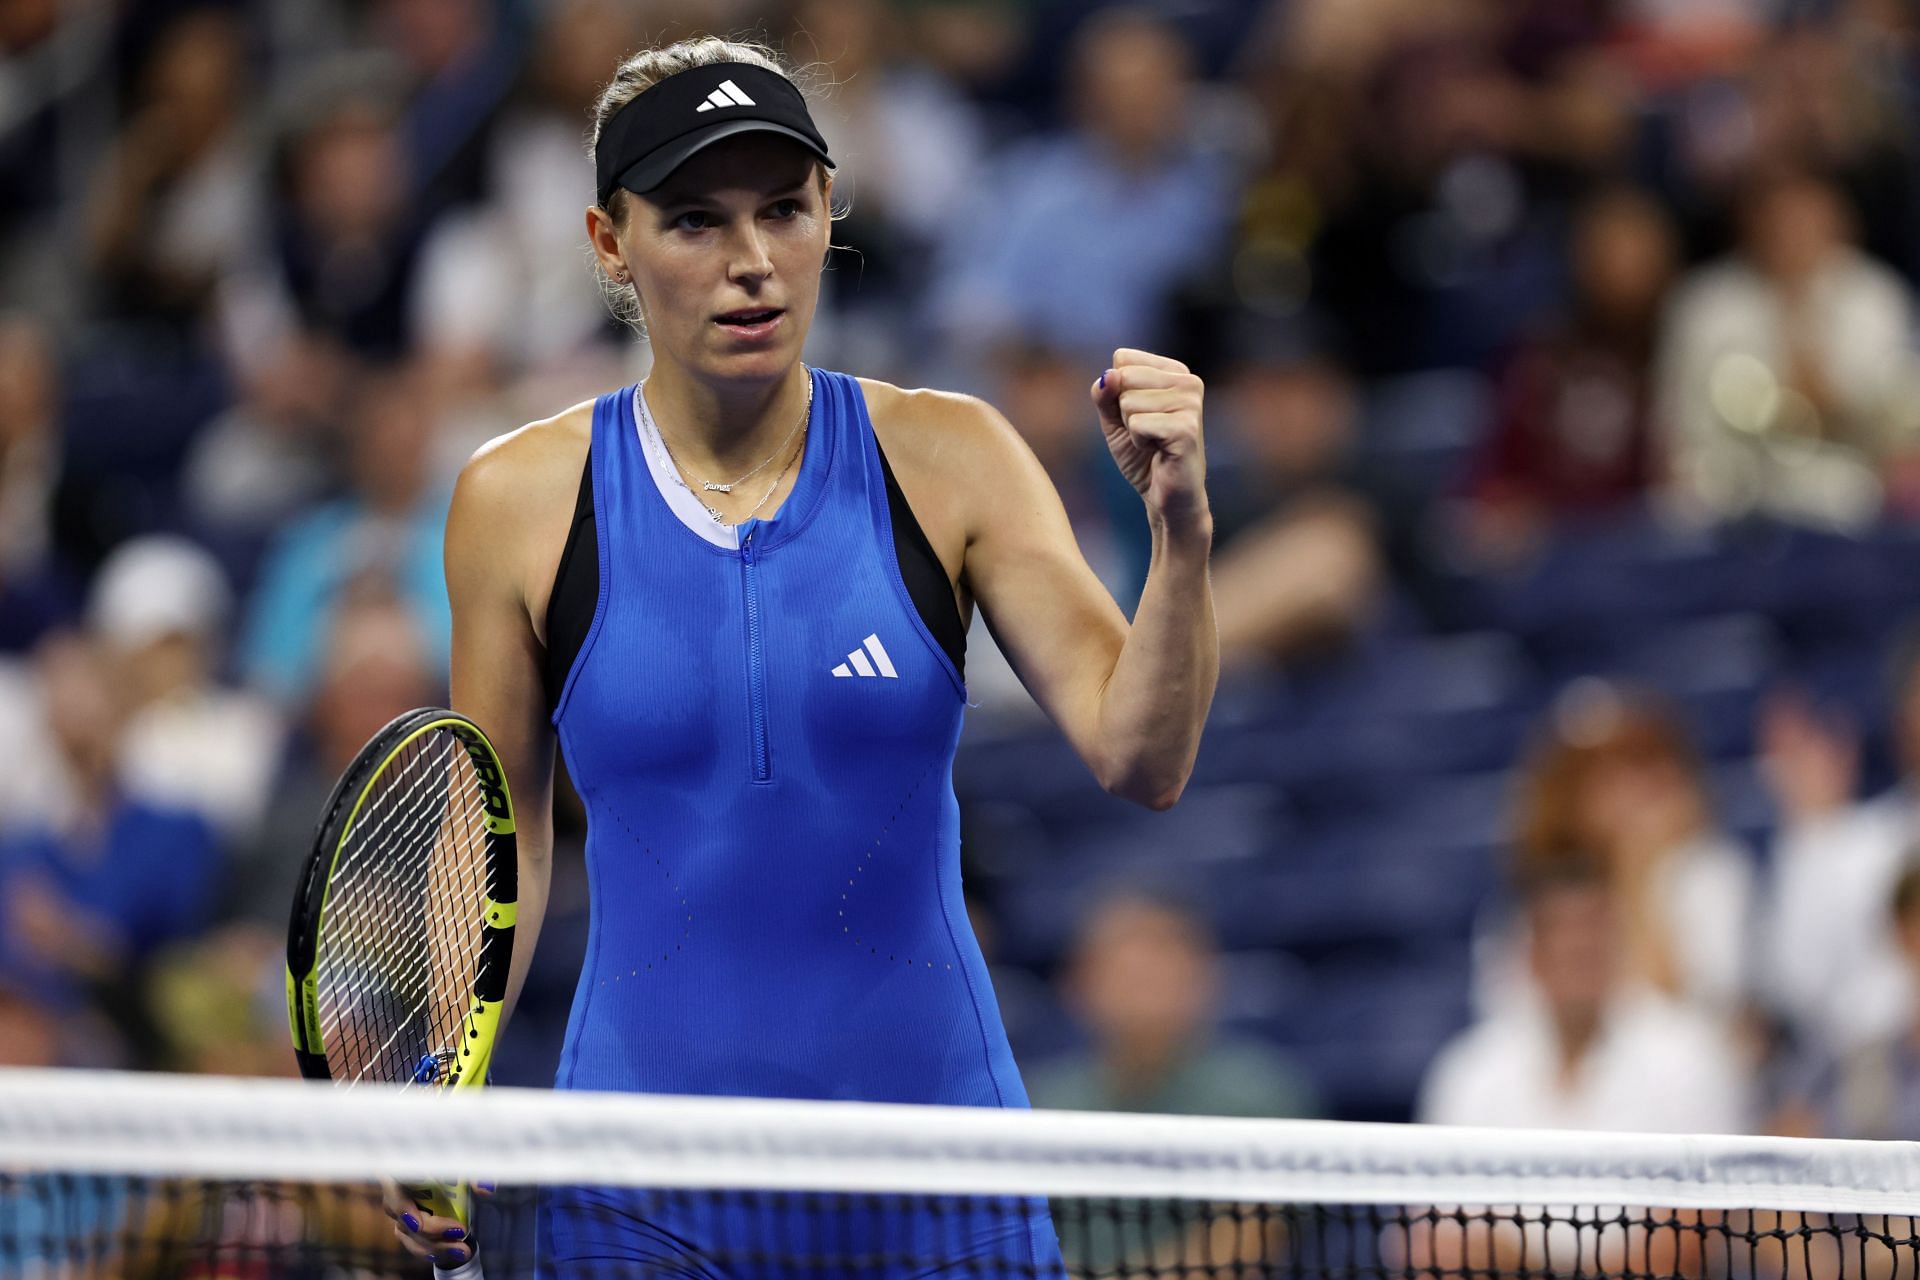 Caroline Wozniacki was pictured at the 2023 US Open.